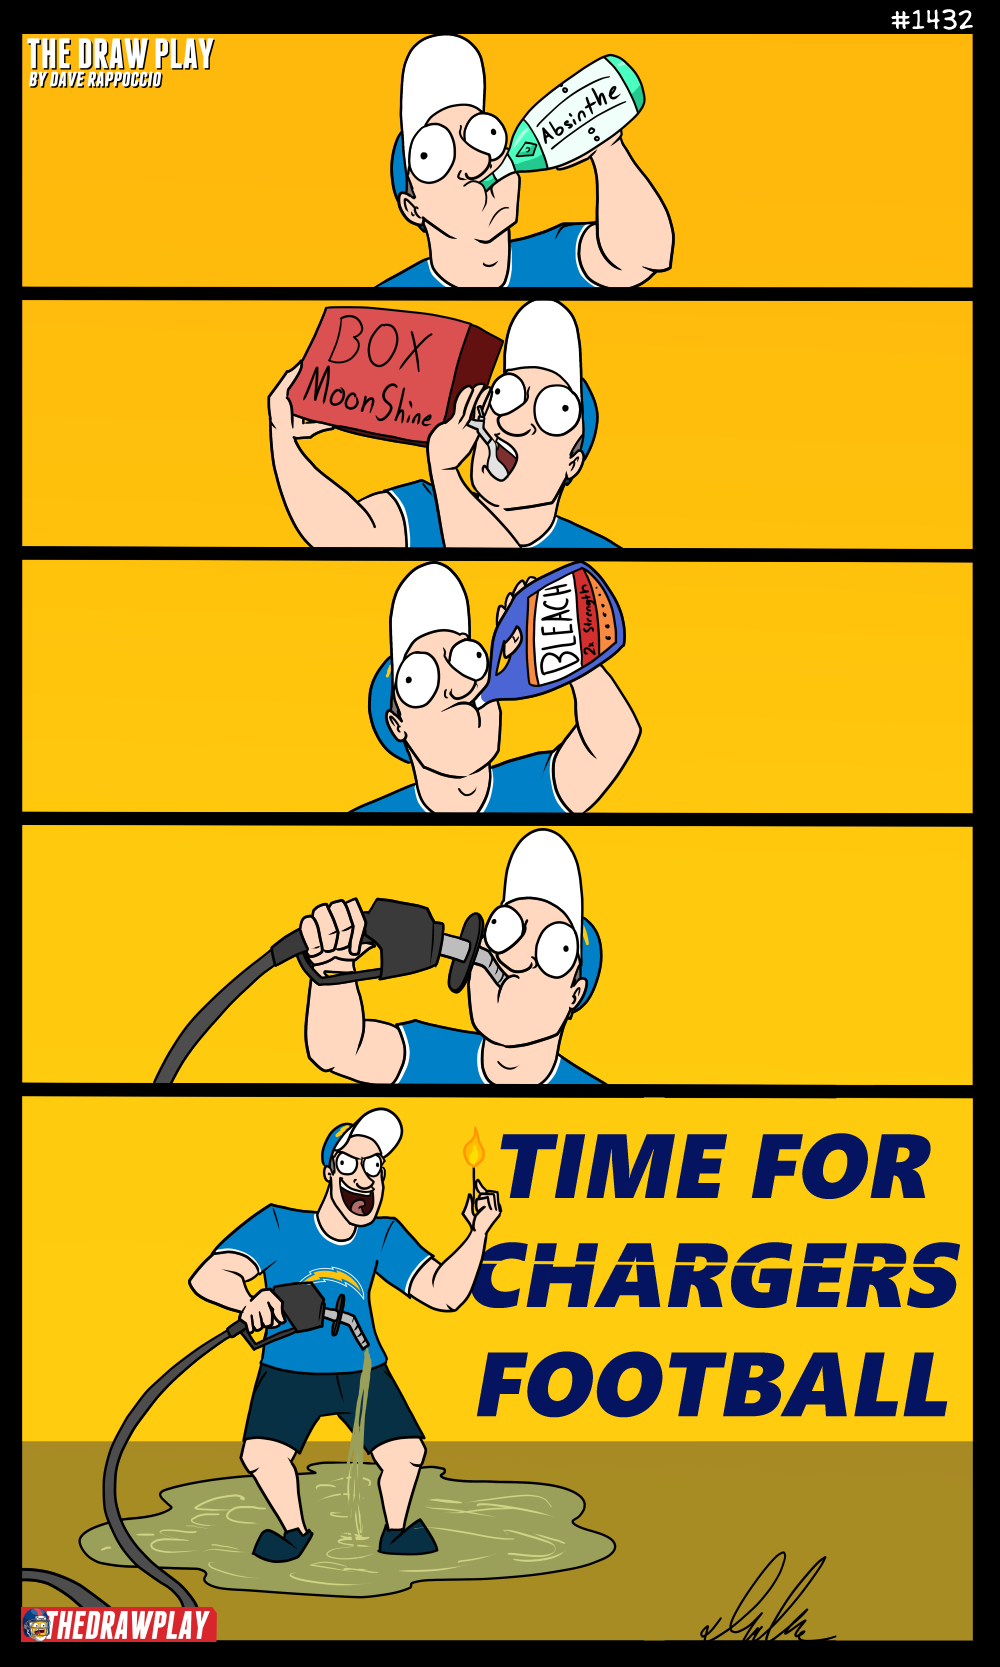 With the Chargers luck, the guy would live, forever scarred 